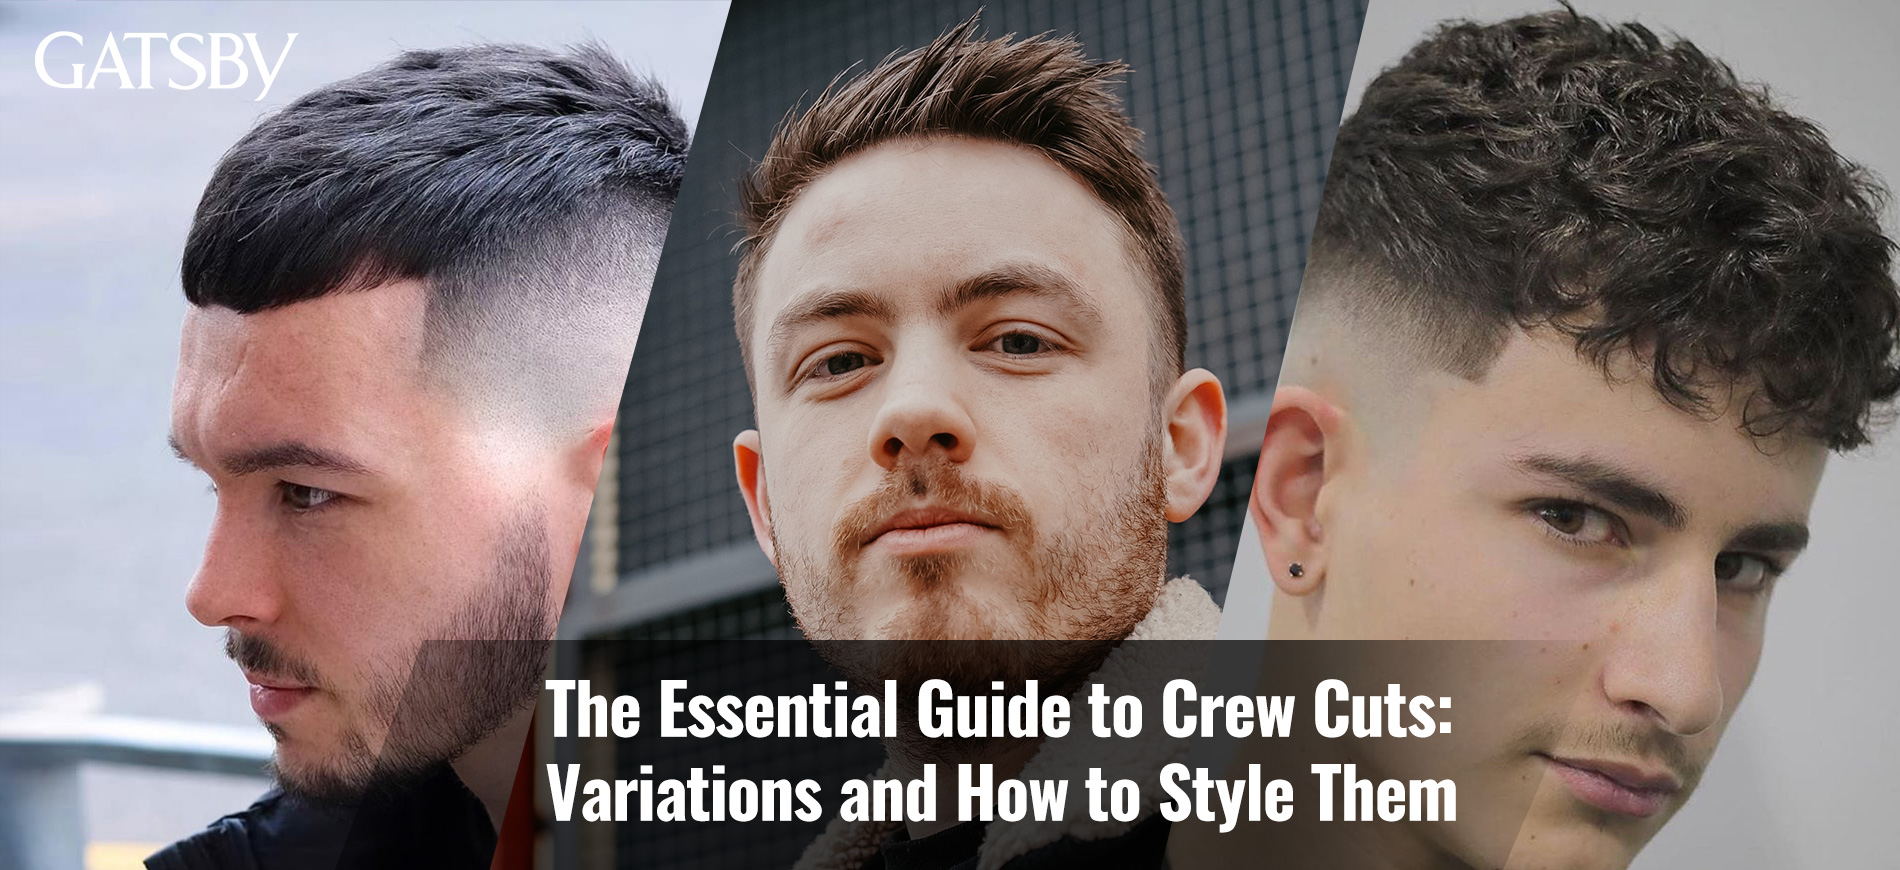 The Essential Guide to Crew Cuts: Variations and How to Style Them